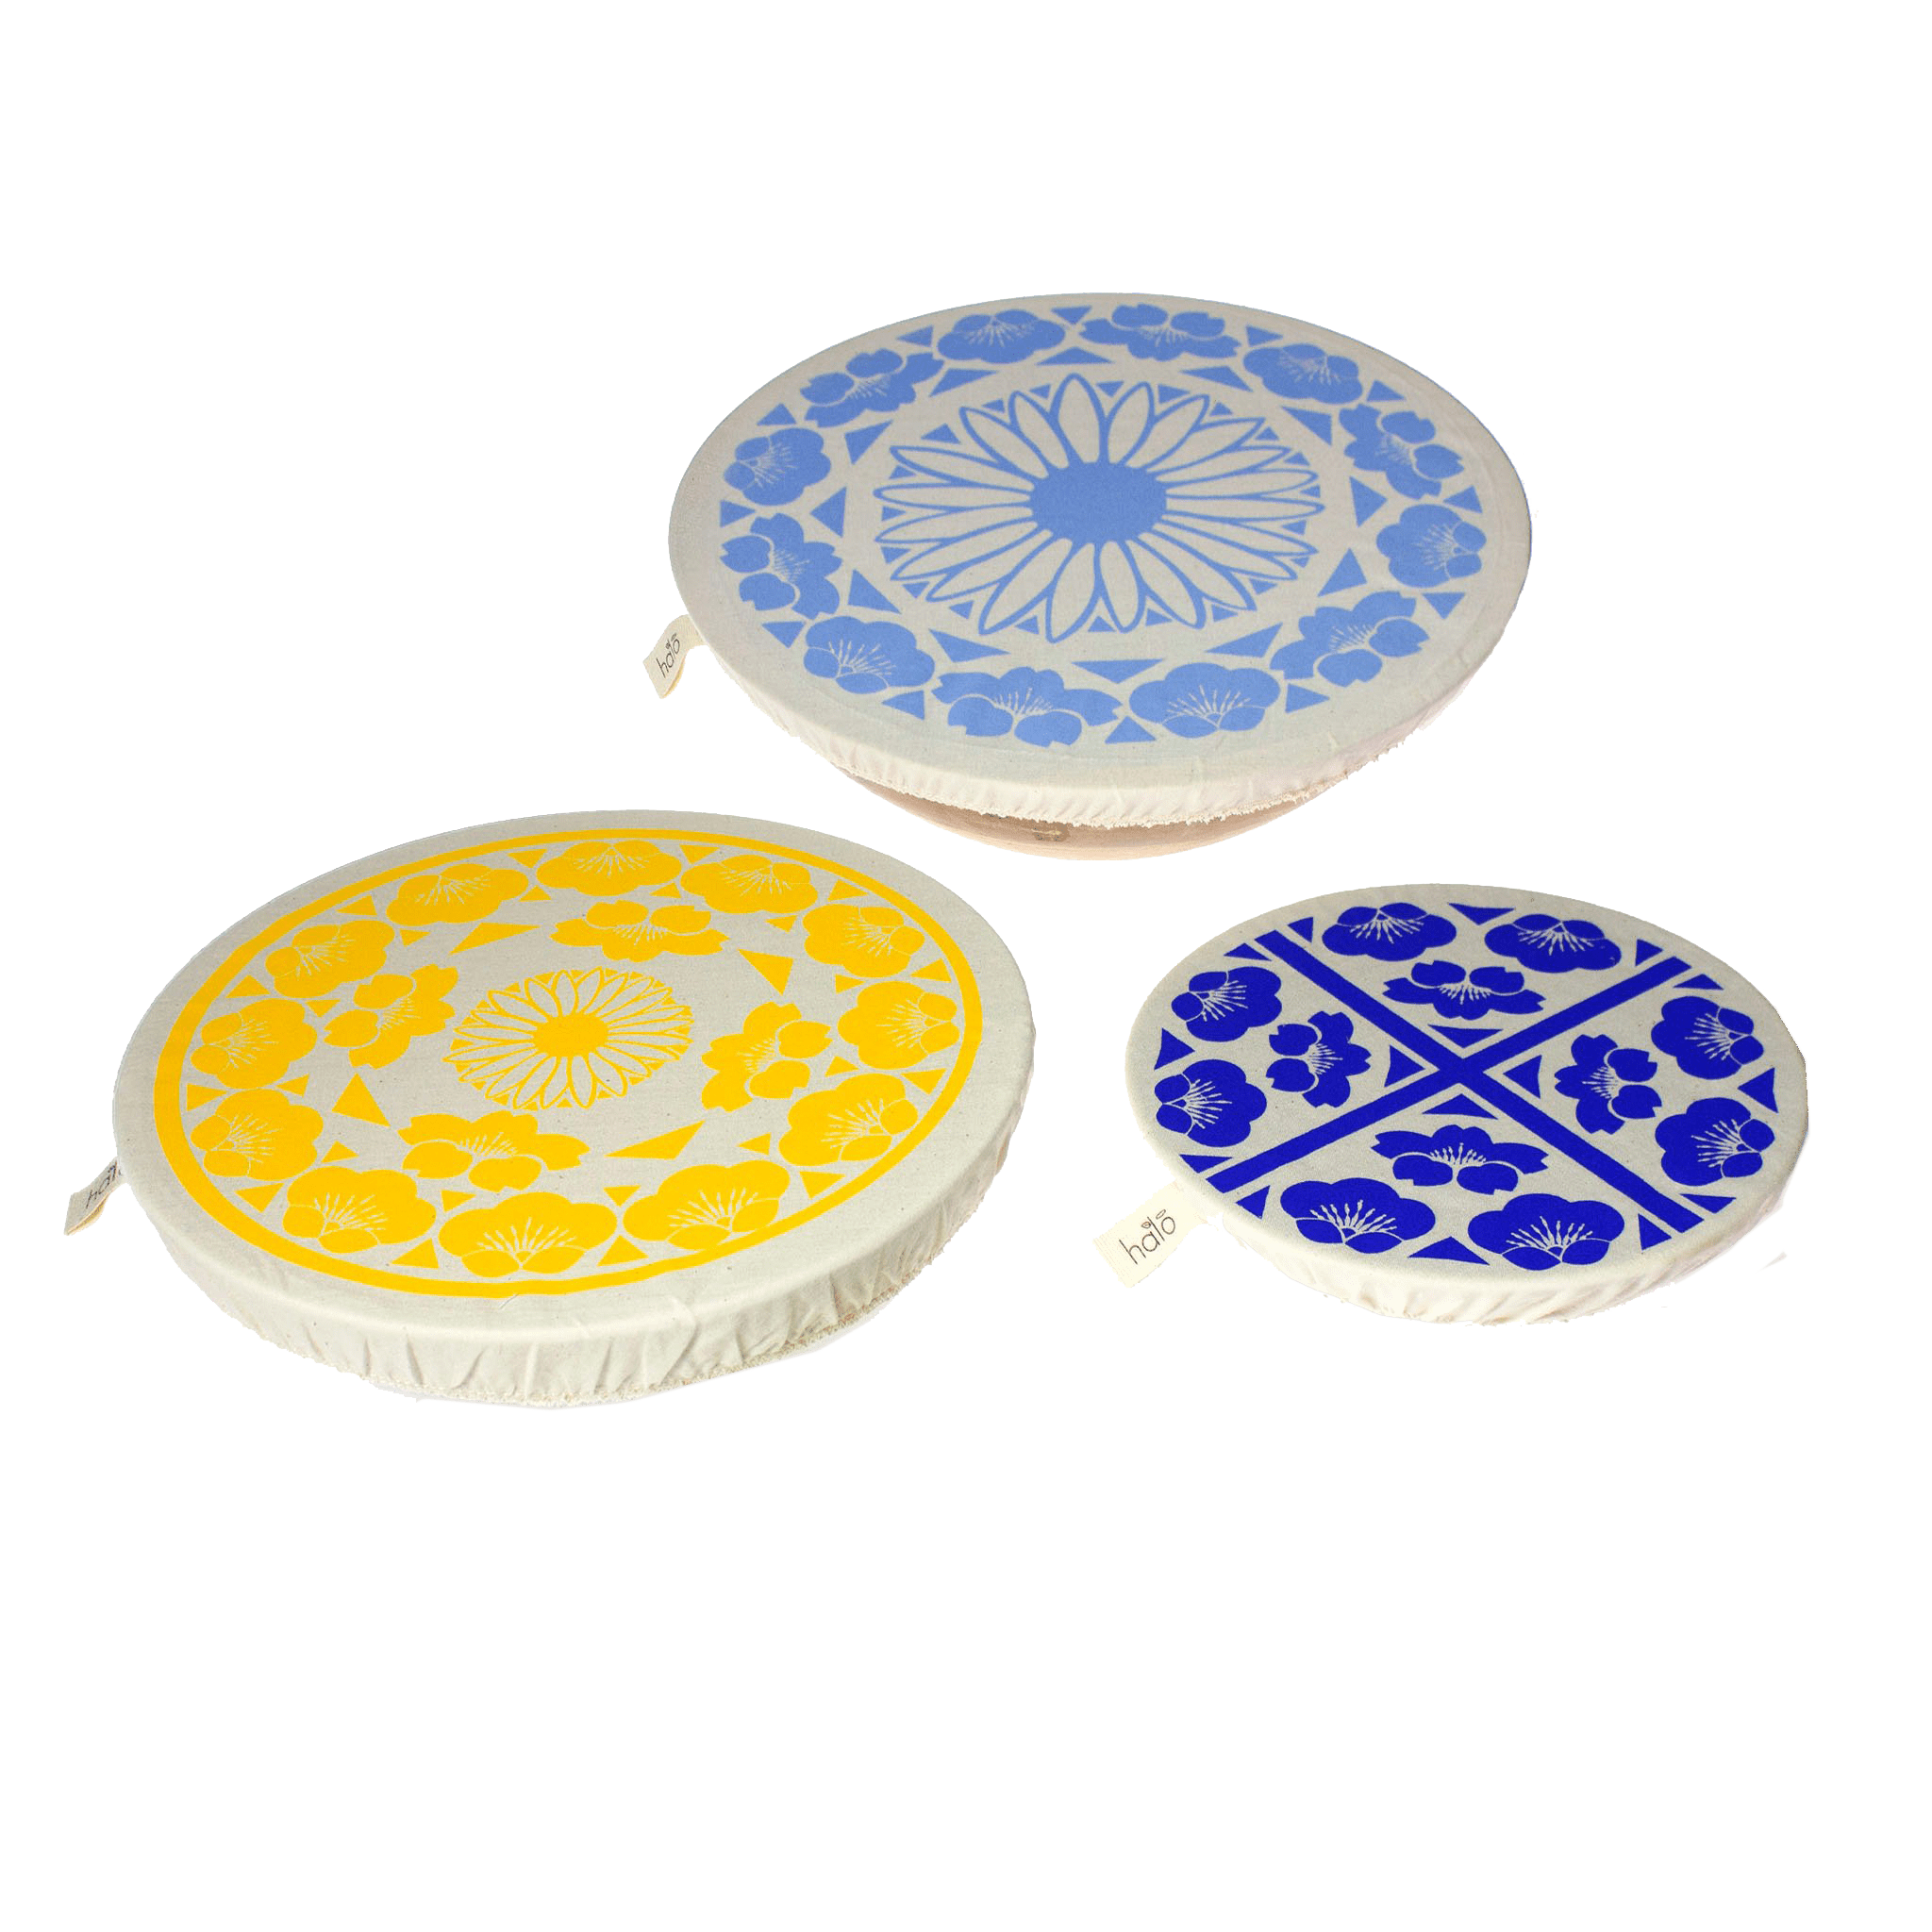 cotton fabric dish covers